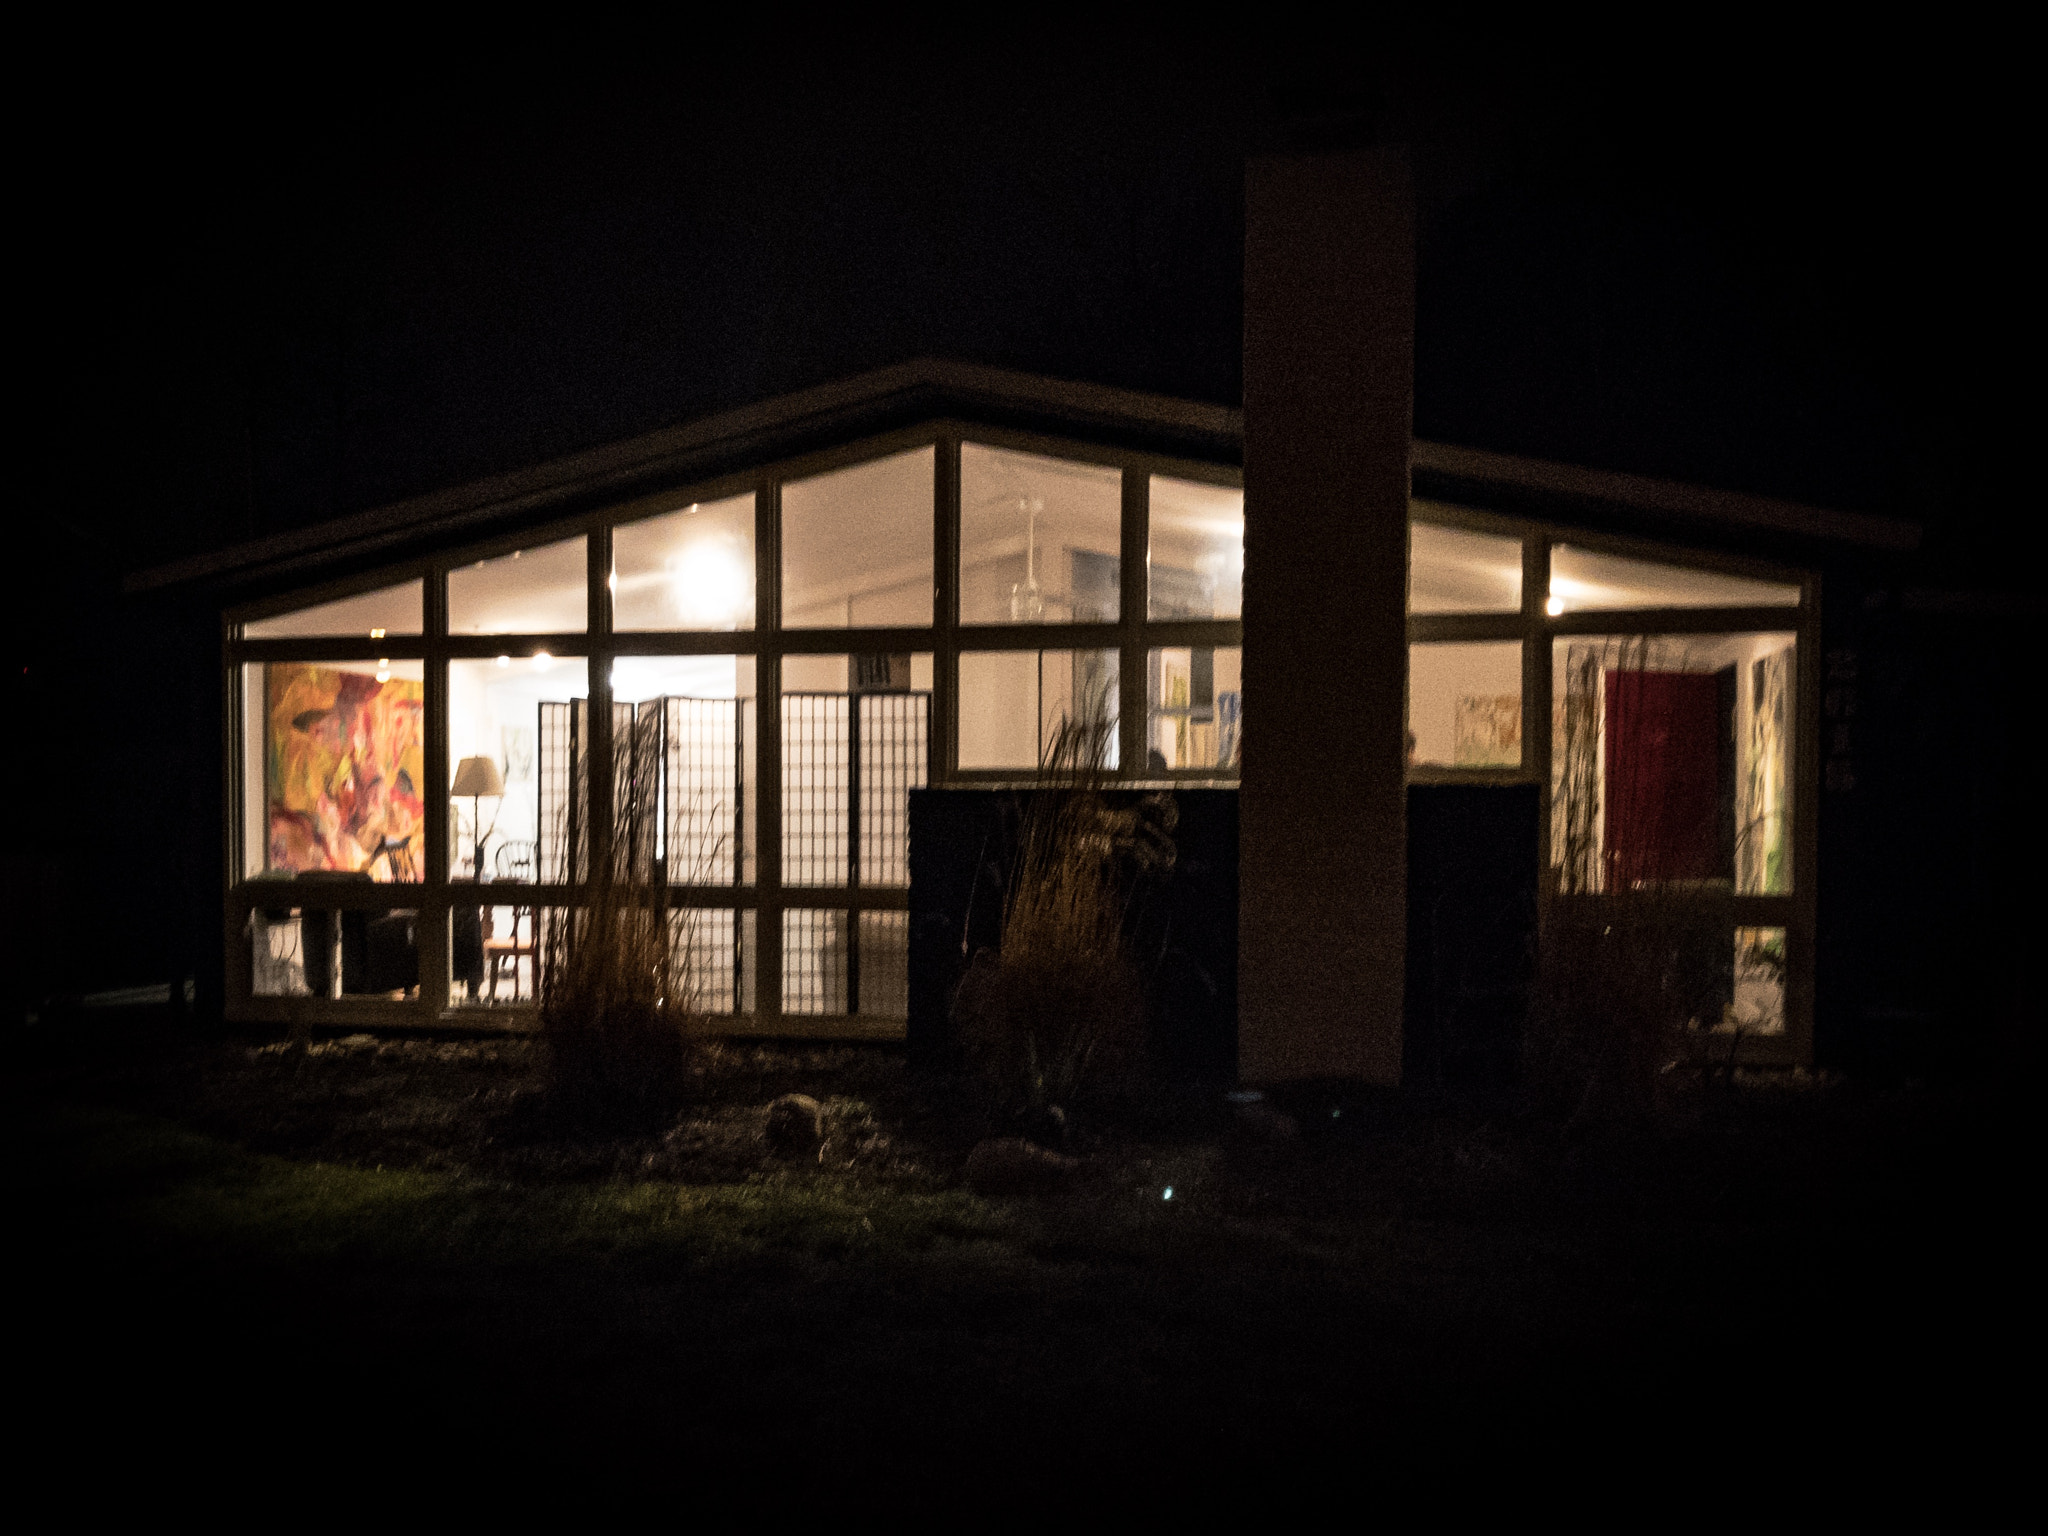 Apple iPhone 7 Plus + iPhone 7 Plus back camera 3.99mm f/1.8 sample photo. Mid century modern house at night photography